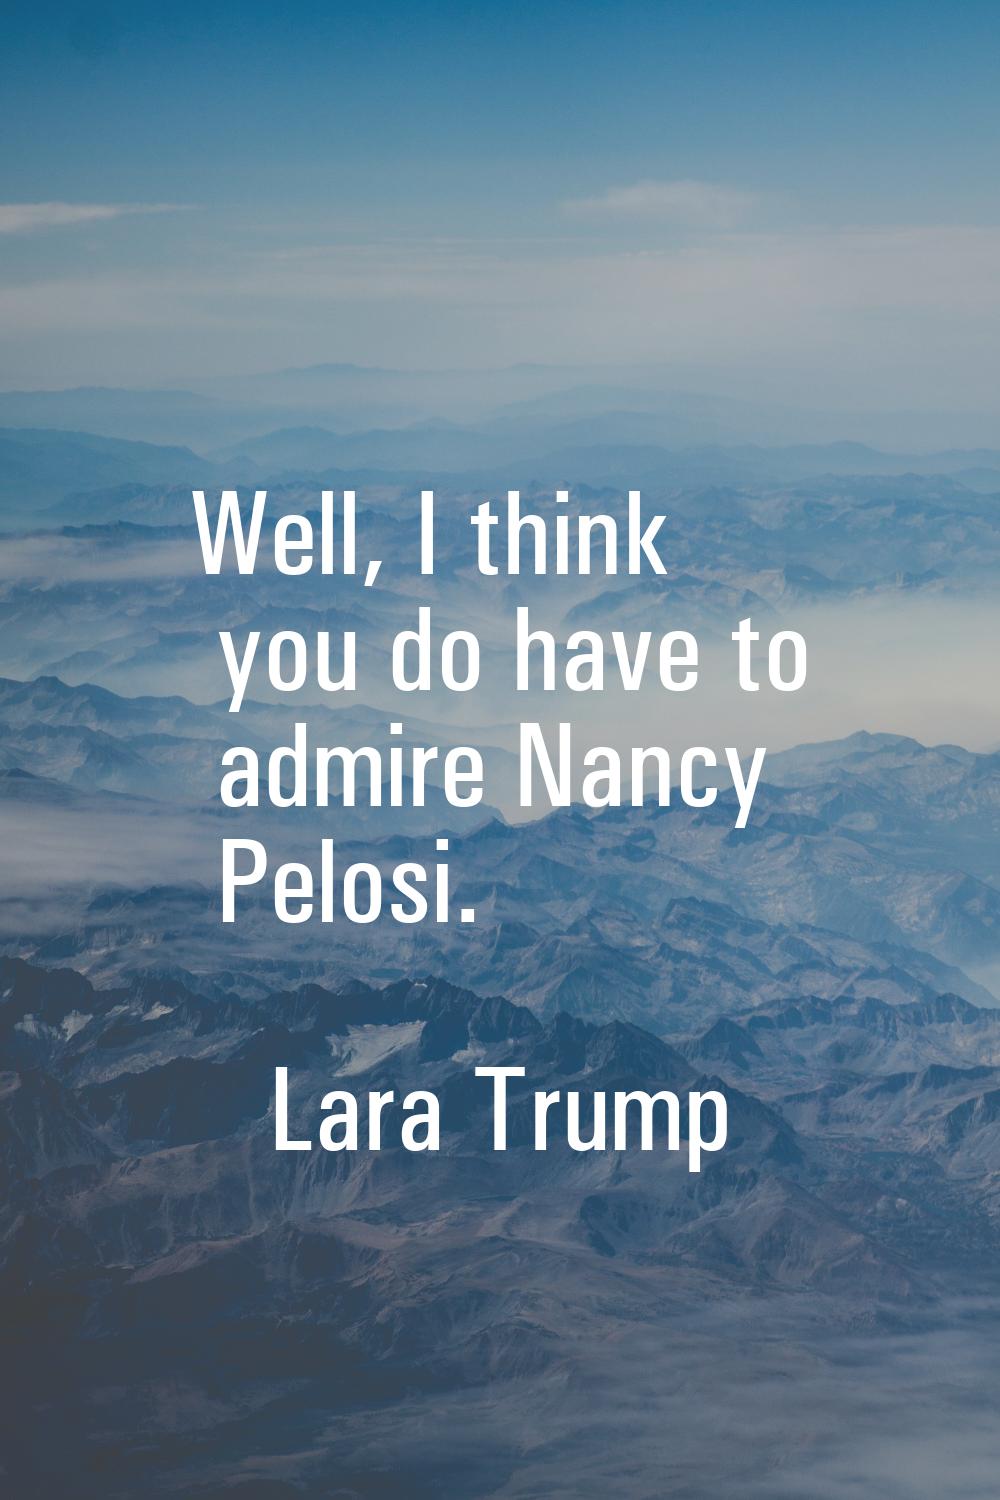 Well, I think you do have to admire Nancy Pelosi.